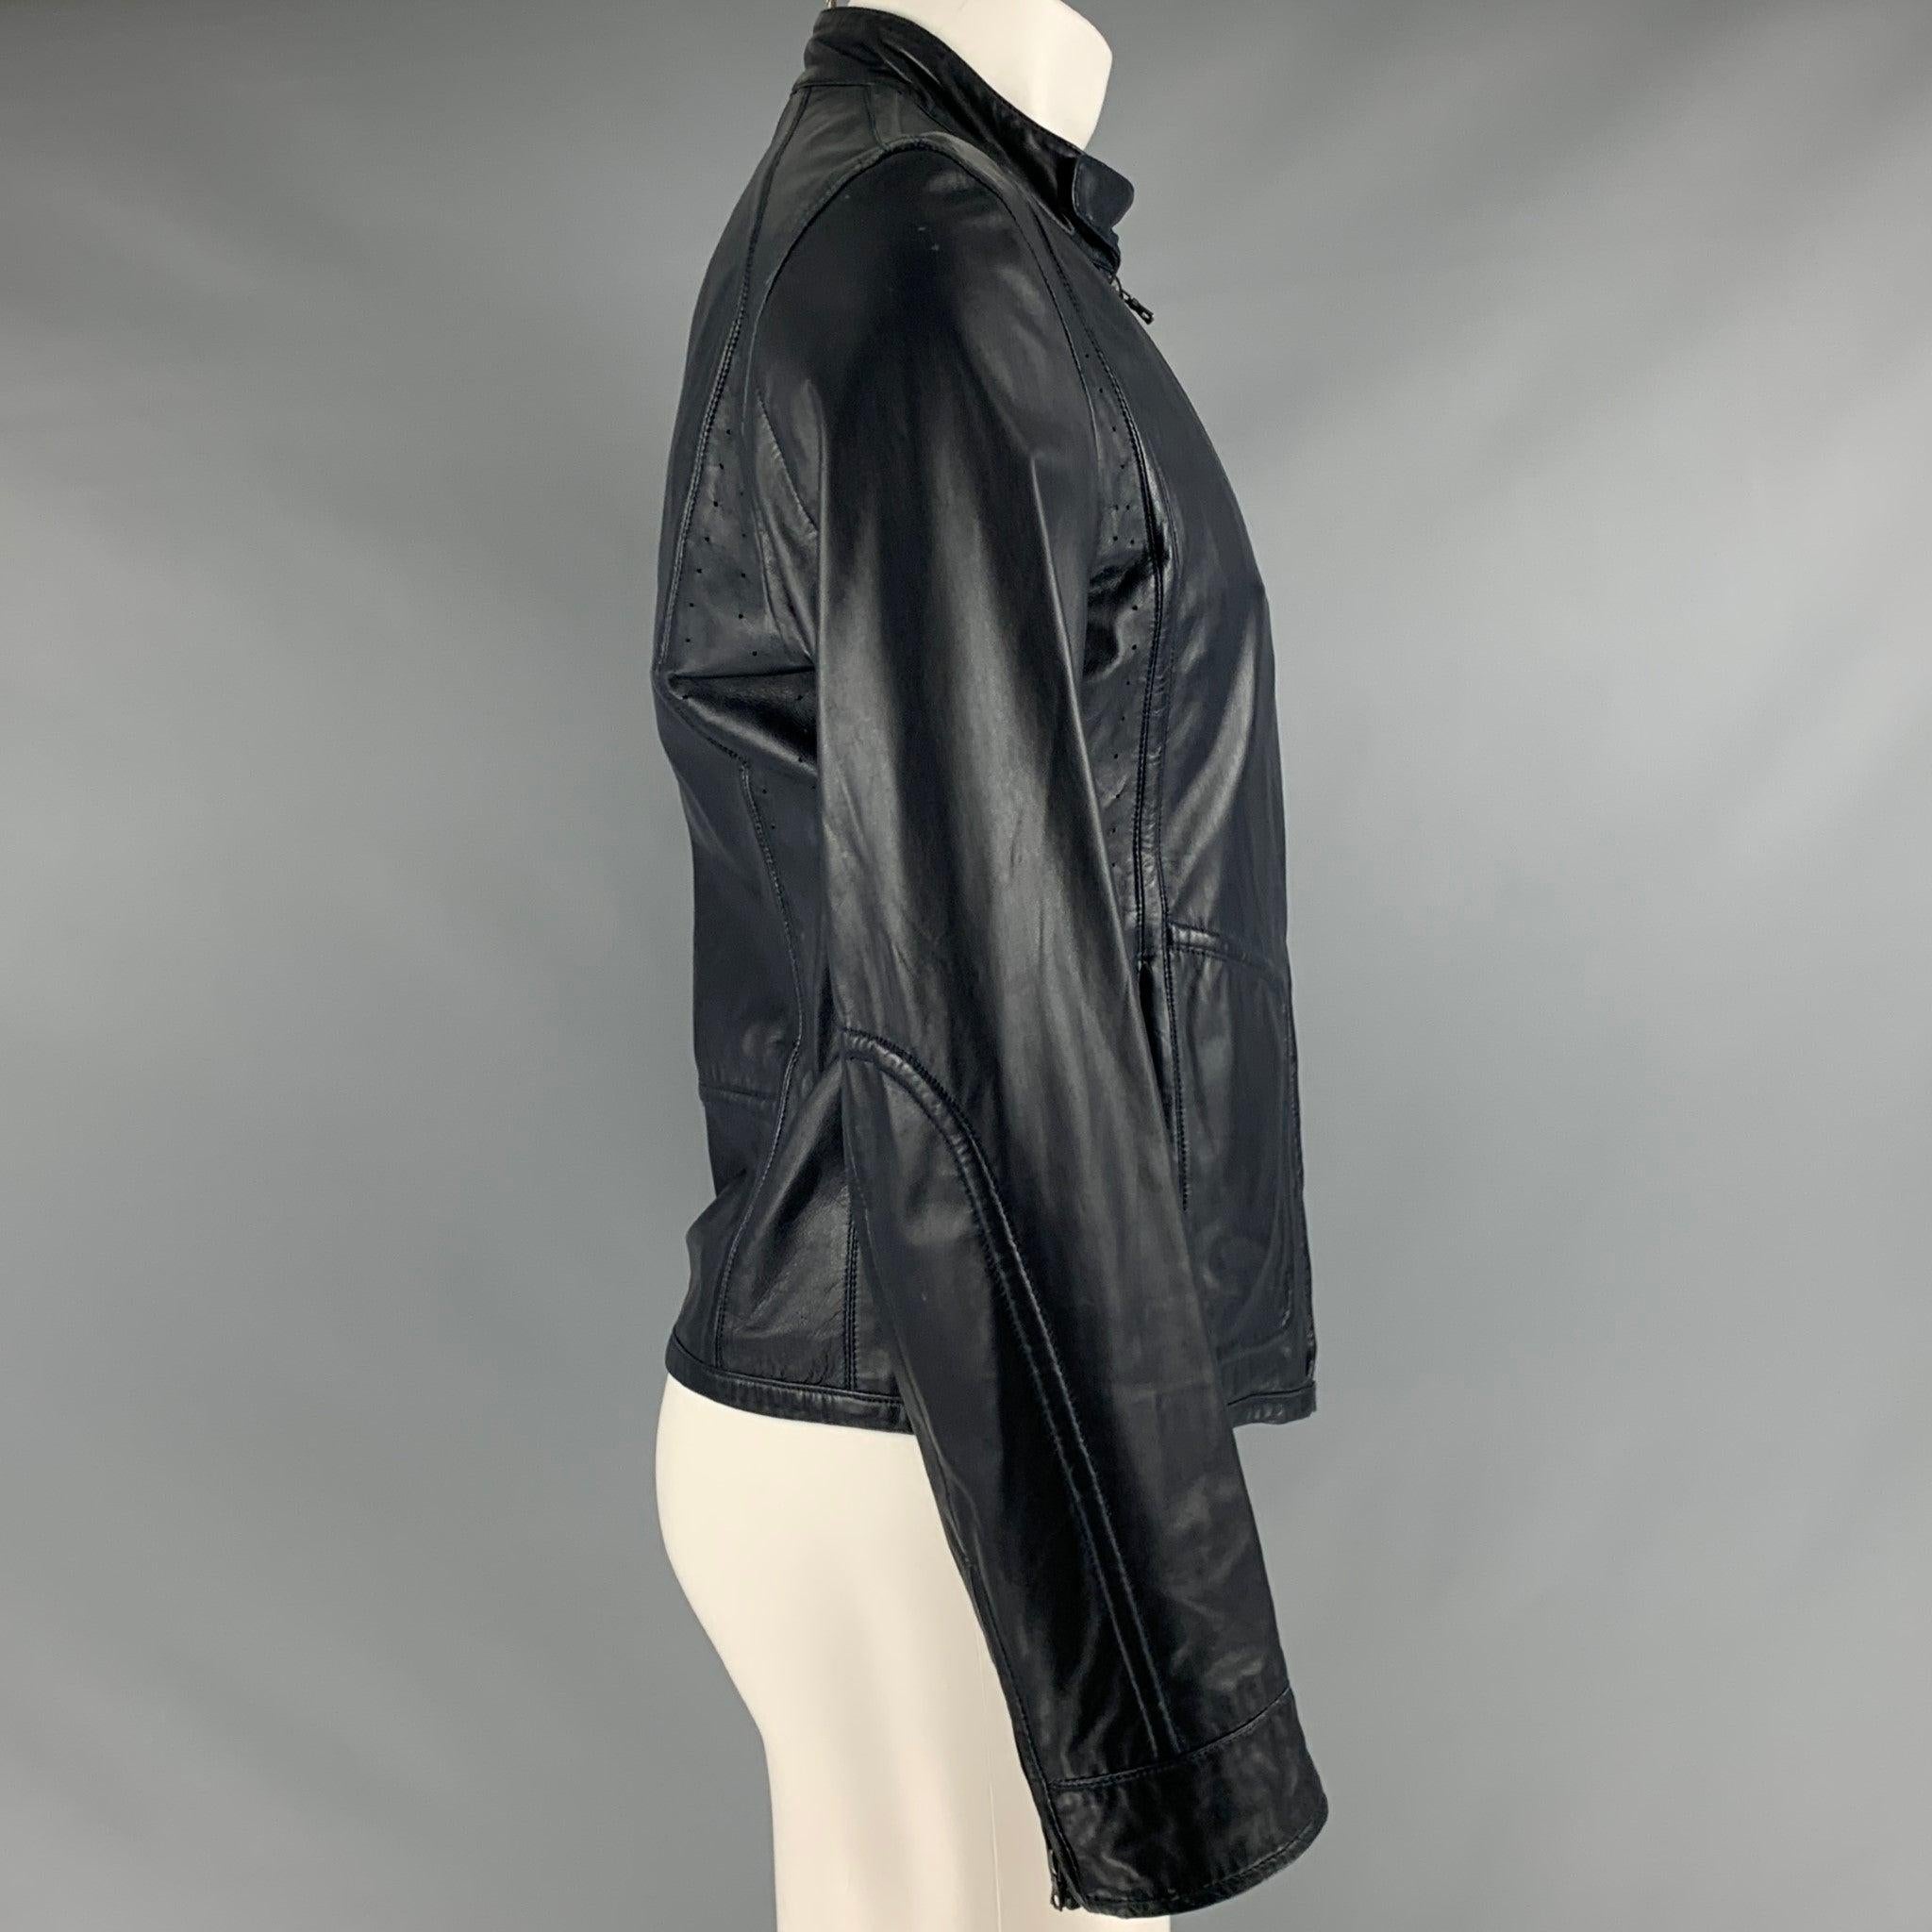 ELIE TAHARI jacket
in a navy leather fabric featuring four pockets and a zip up closure.Very Good Pre-Owned Condition. Minor signs of wear. 

Marked:   size not marked. 

Measurements: 
 
Shoulder: 17.5 inches Chest: 37 inches Sleeve: 26 inches